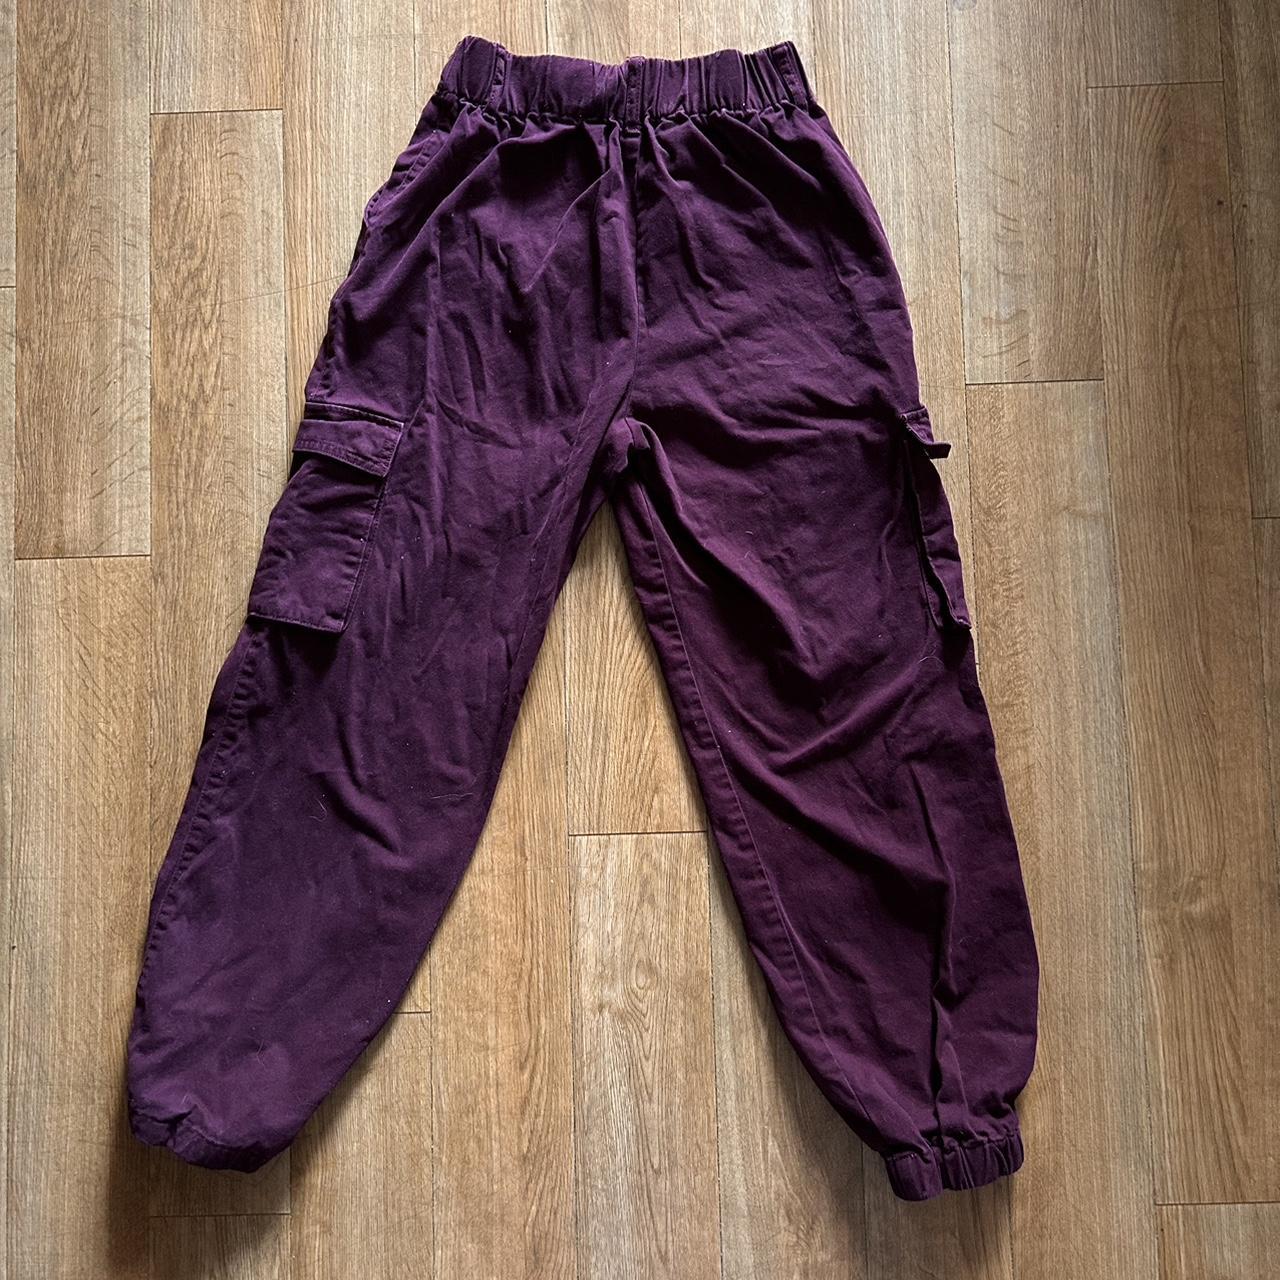 Burgundy cargo pants ⊛ Waist is 13 inches laid flat - Depop